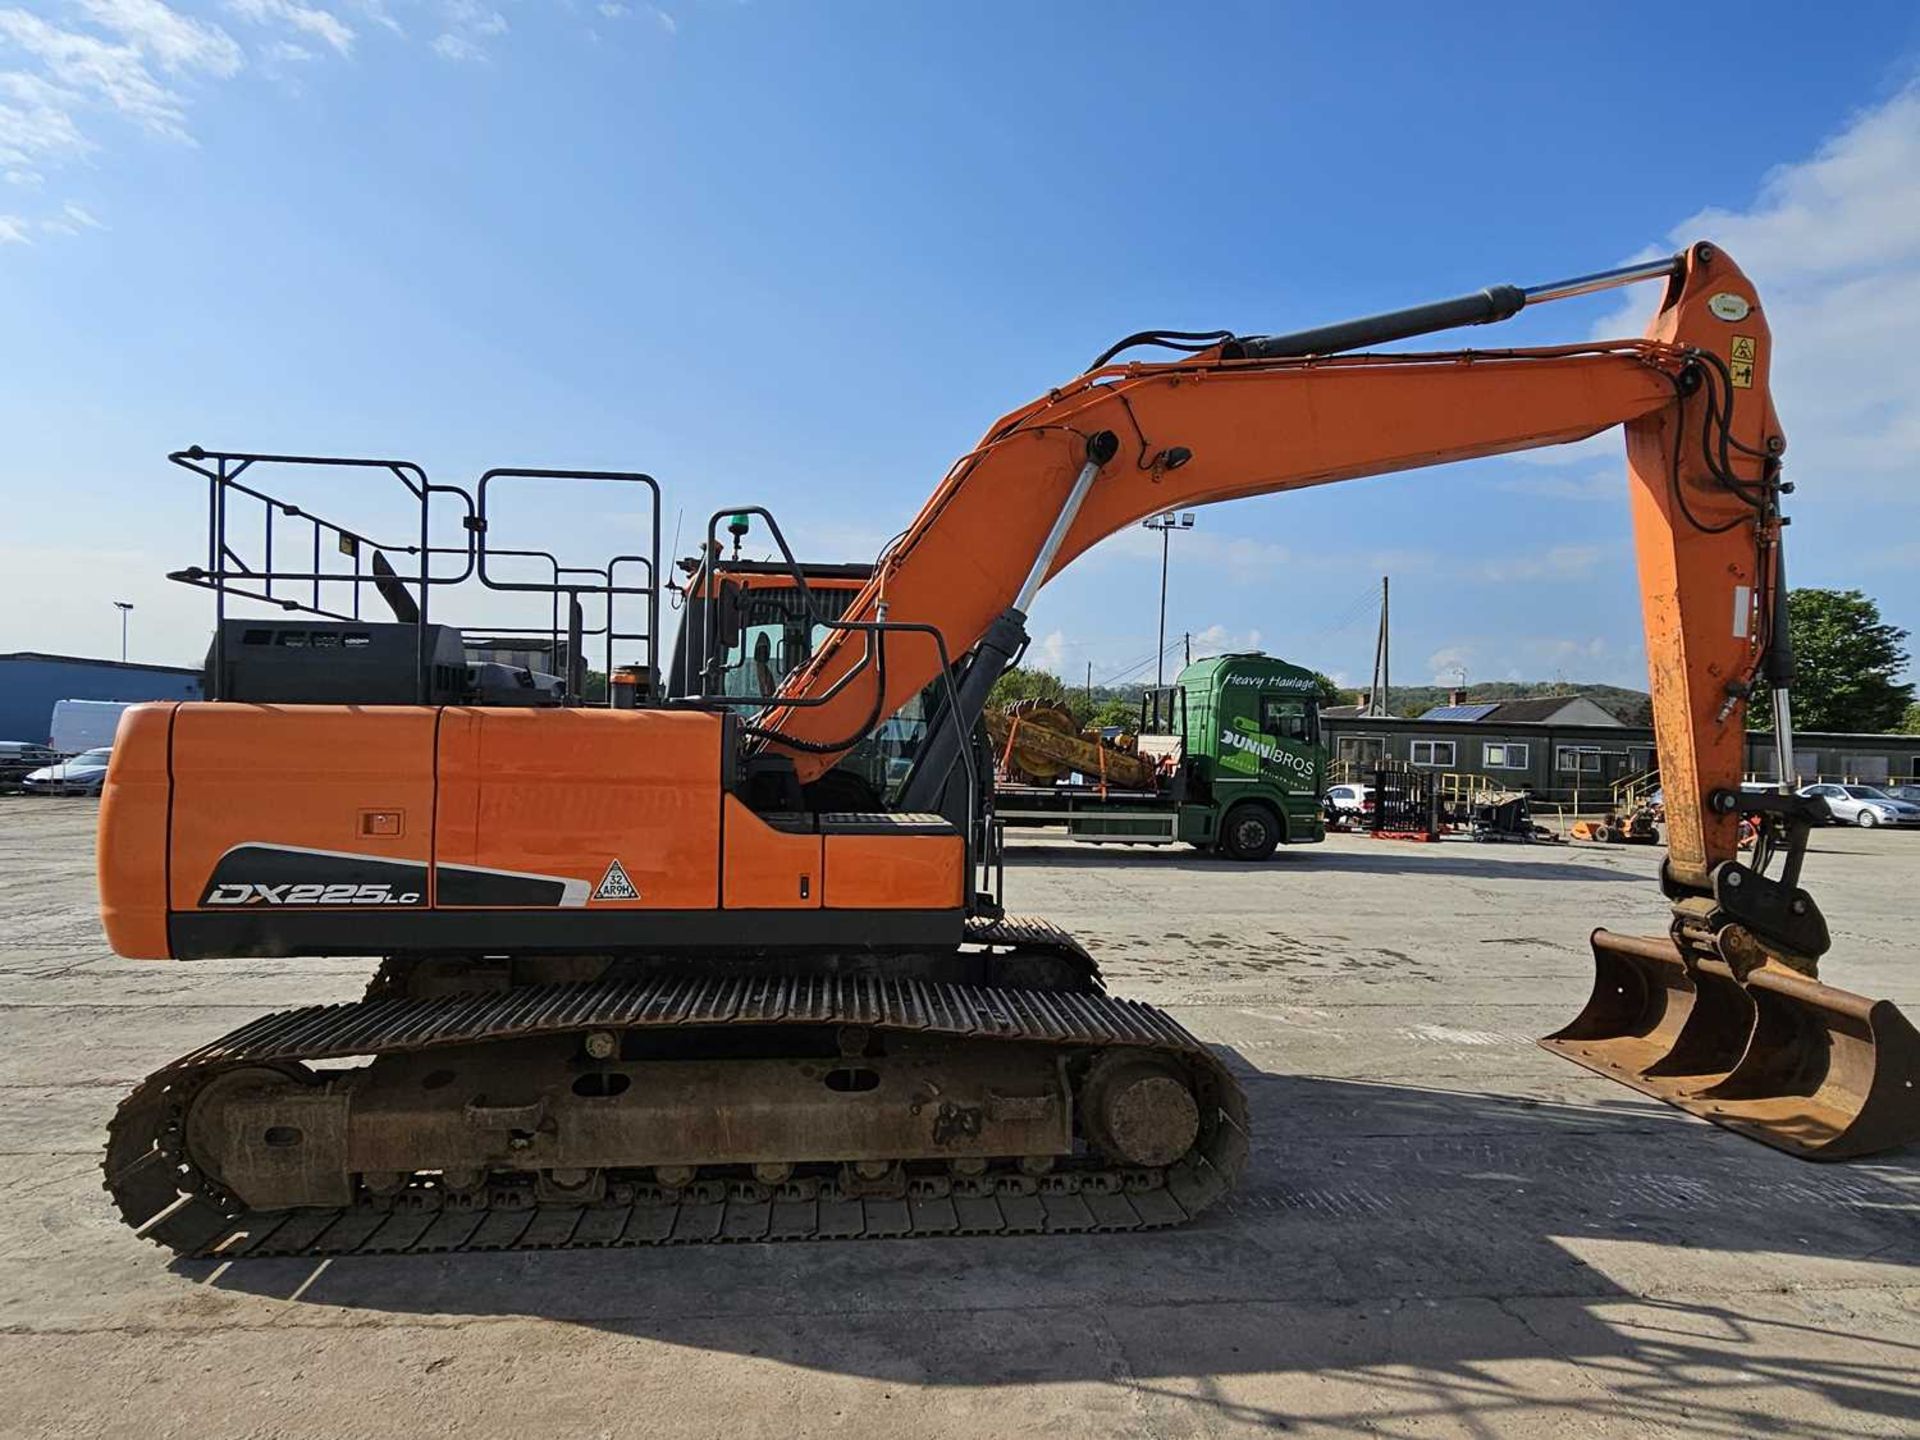 2018 Doosan DX225LC-5 800mm Pads, CV, Geith Hydraulic QH, Piped, Aux. Piping, Demo Cage, Reverse Cam - Image 6 of 34